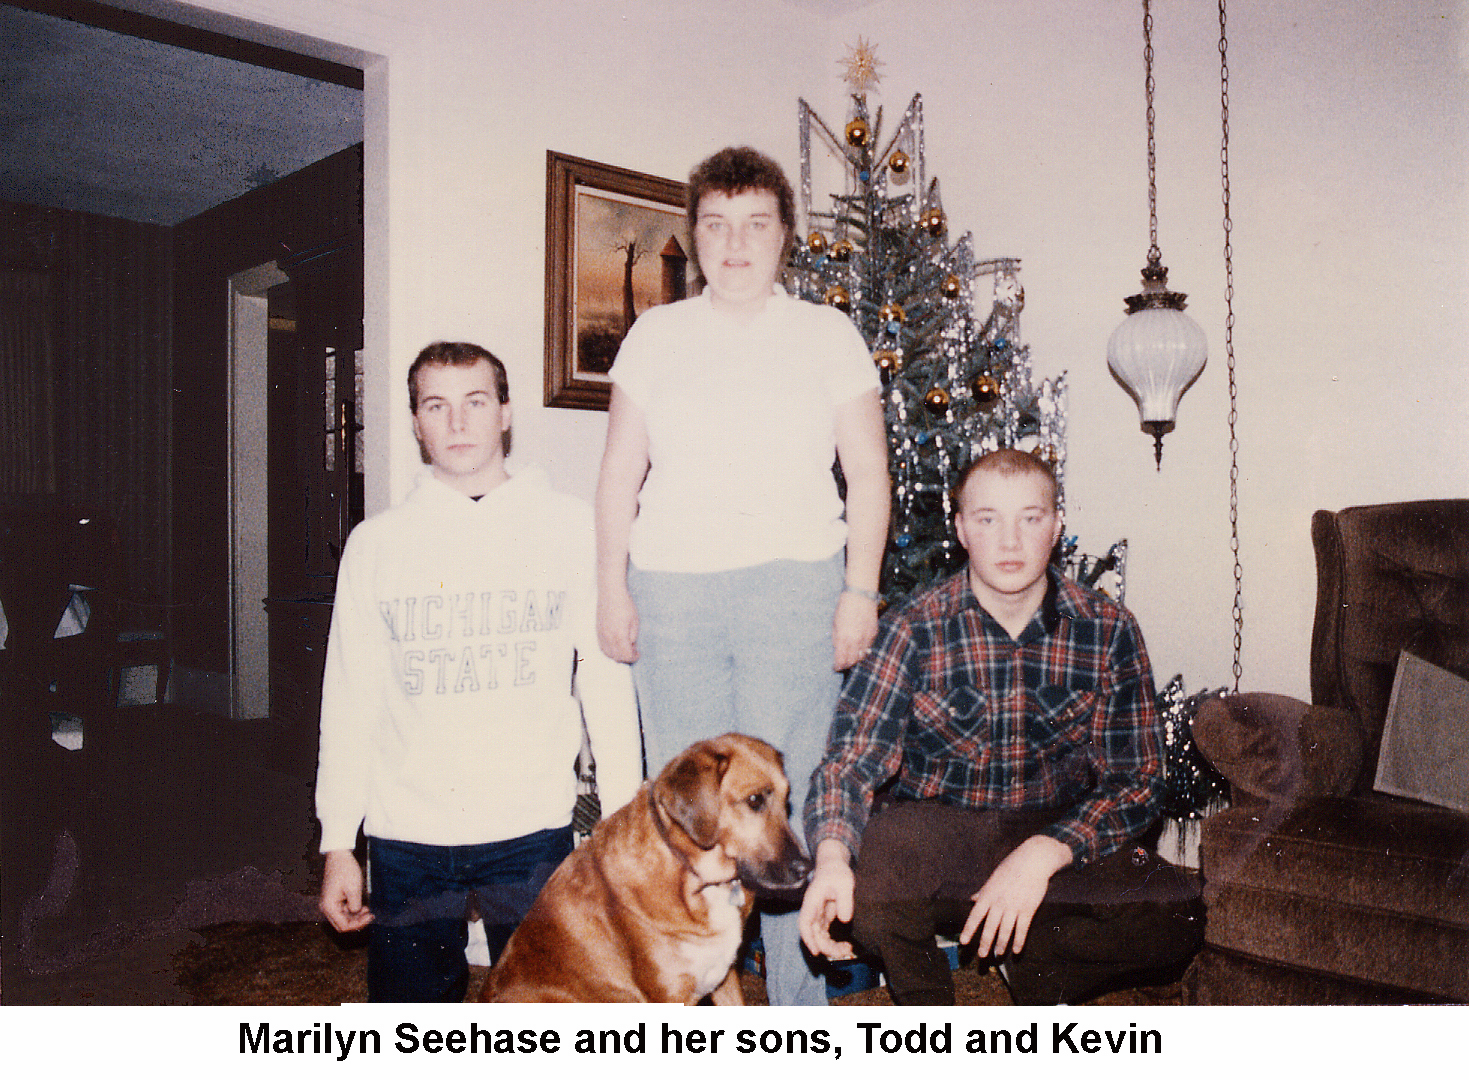 Marilyn Seehase with Todd and Kevin